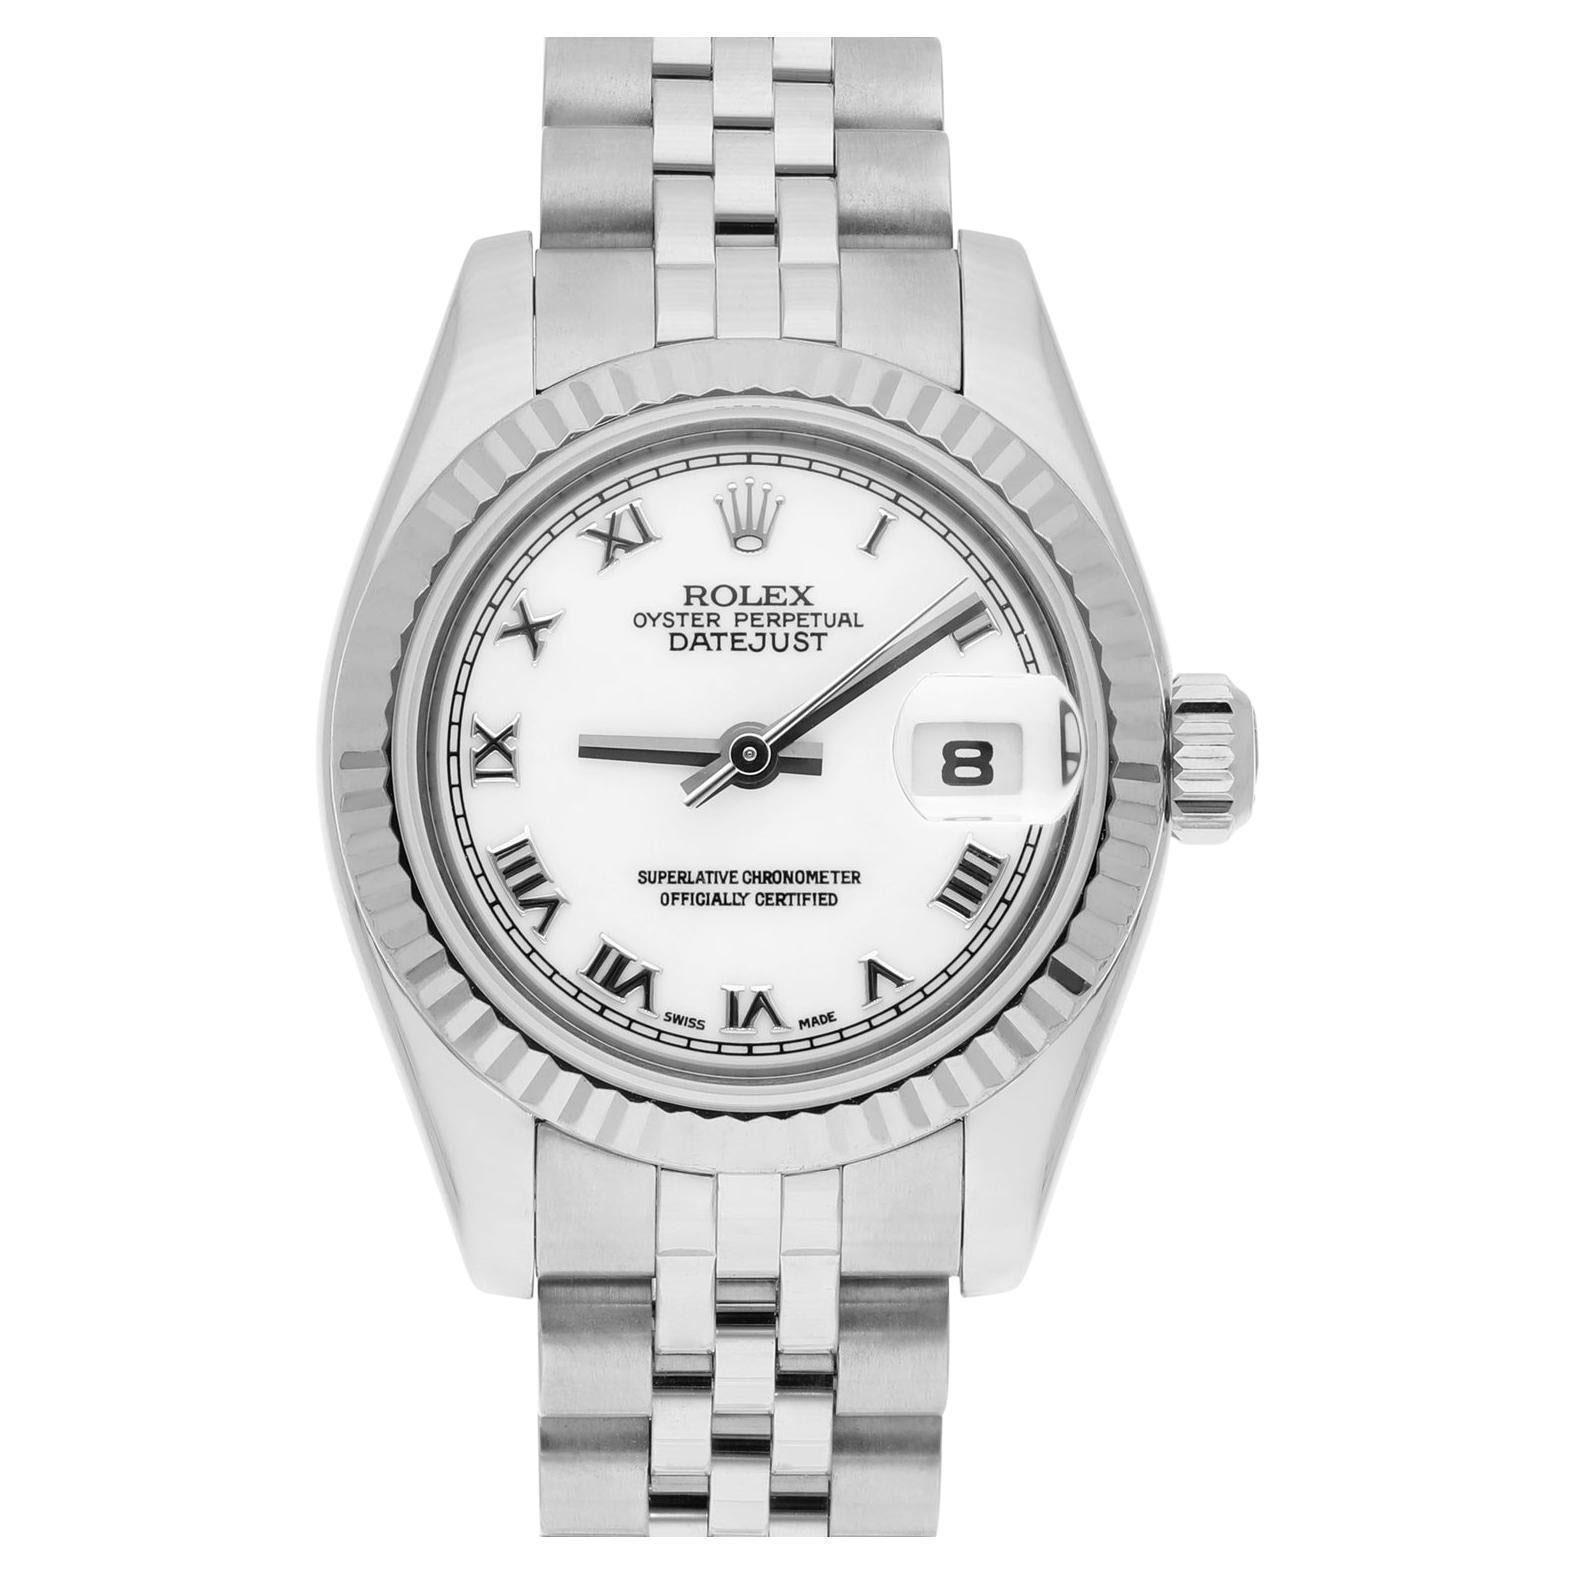 Rolex Lady-Datejust 26mm 179174 Steel & White Gold Watch Roman Dial Complete!